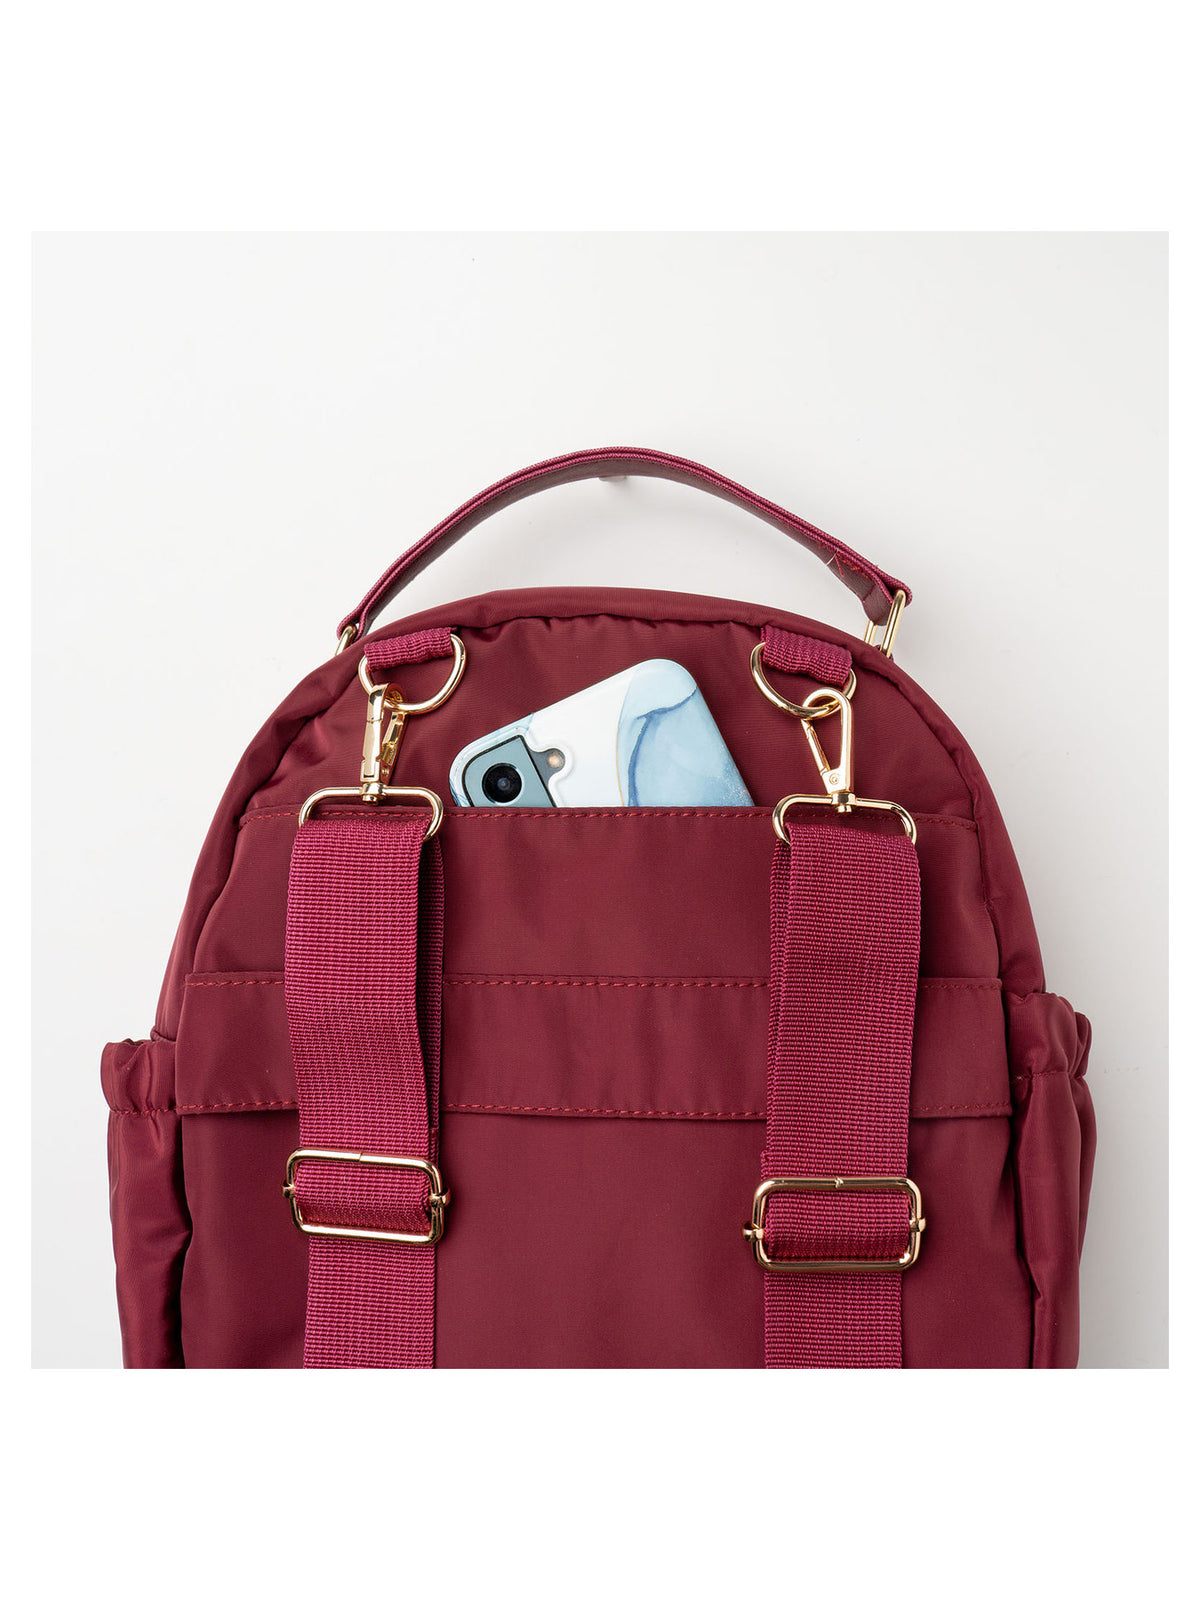 kedzie aire convertible backpack in burgundy